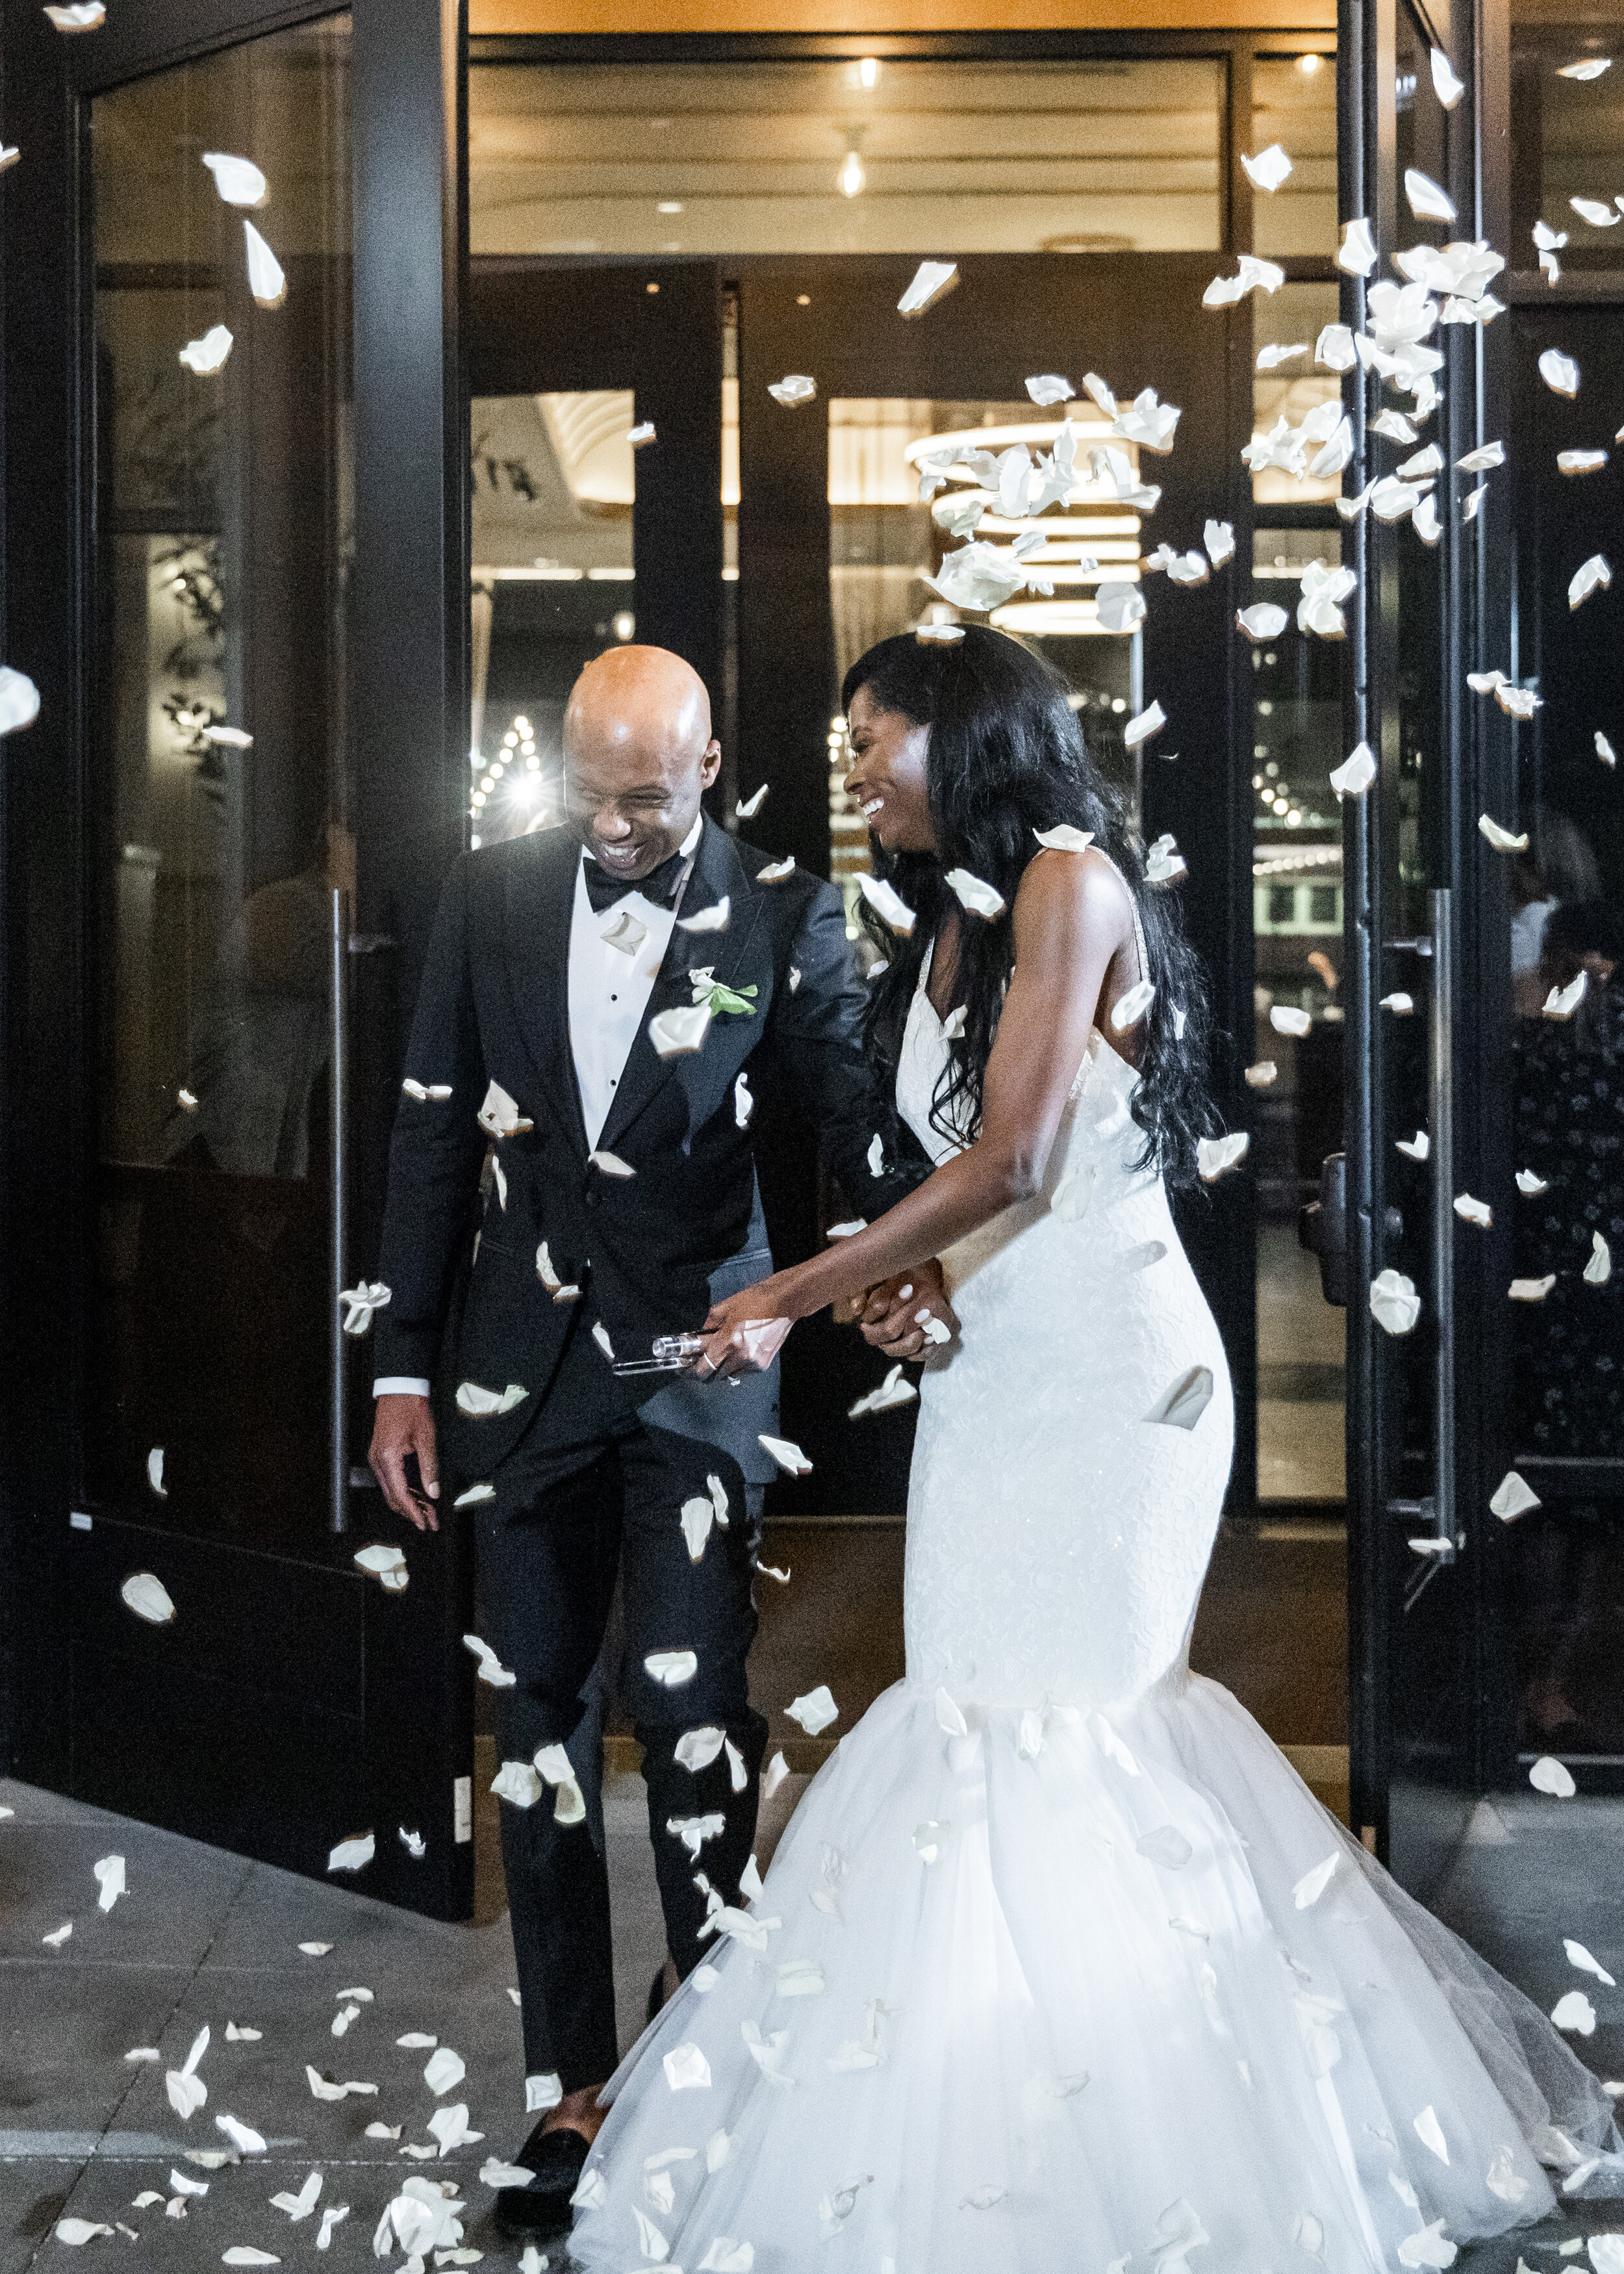  White flower petals shower a happy bride and groom as they exit their Dallas, Texas wedding venue. Wedding exit pictures ideas for wedding reception exit flower petal wedding exit white flower petals at a wedding hotel vin texas wedding fort worth w